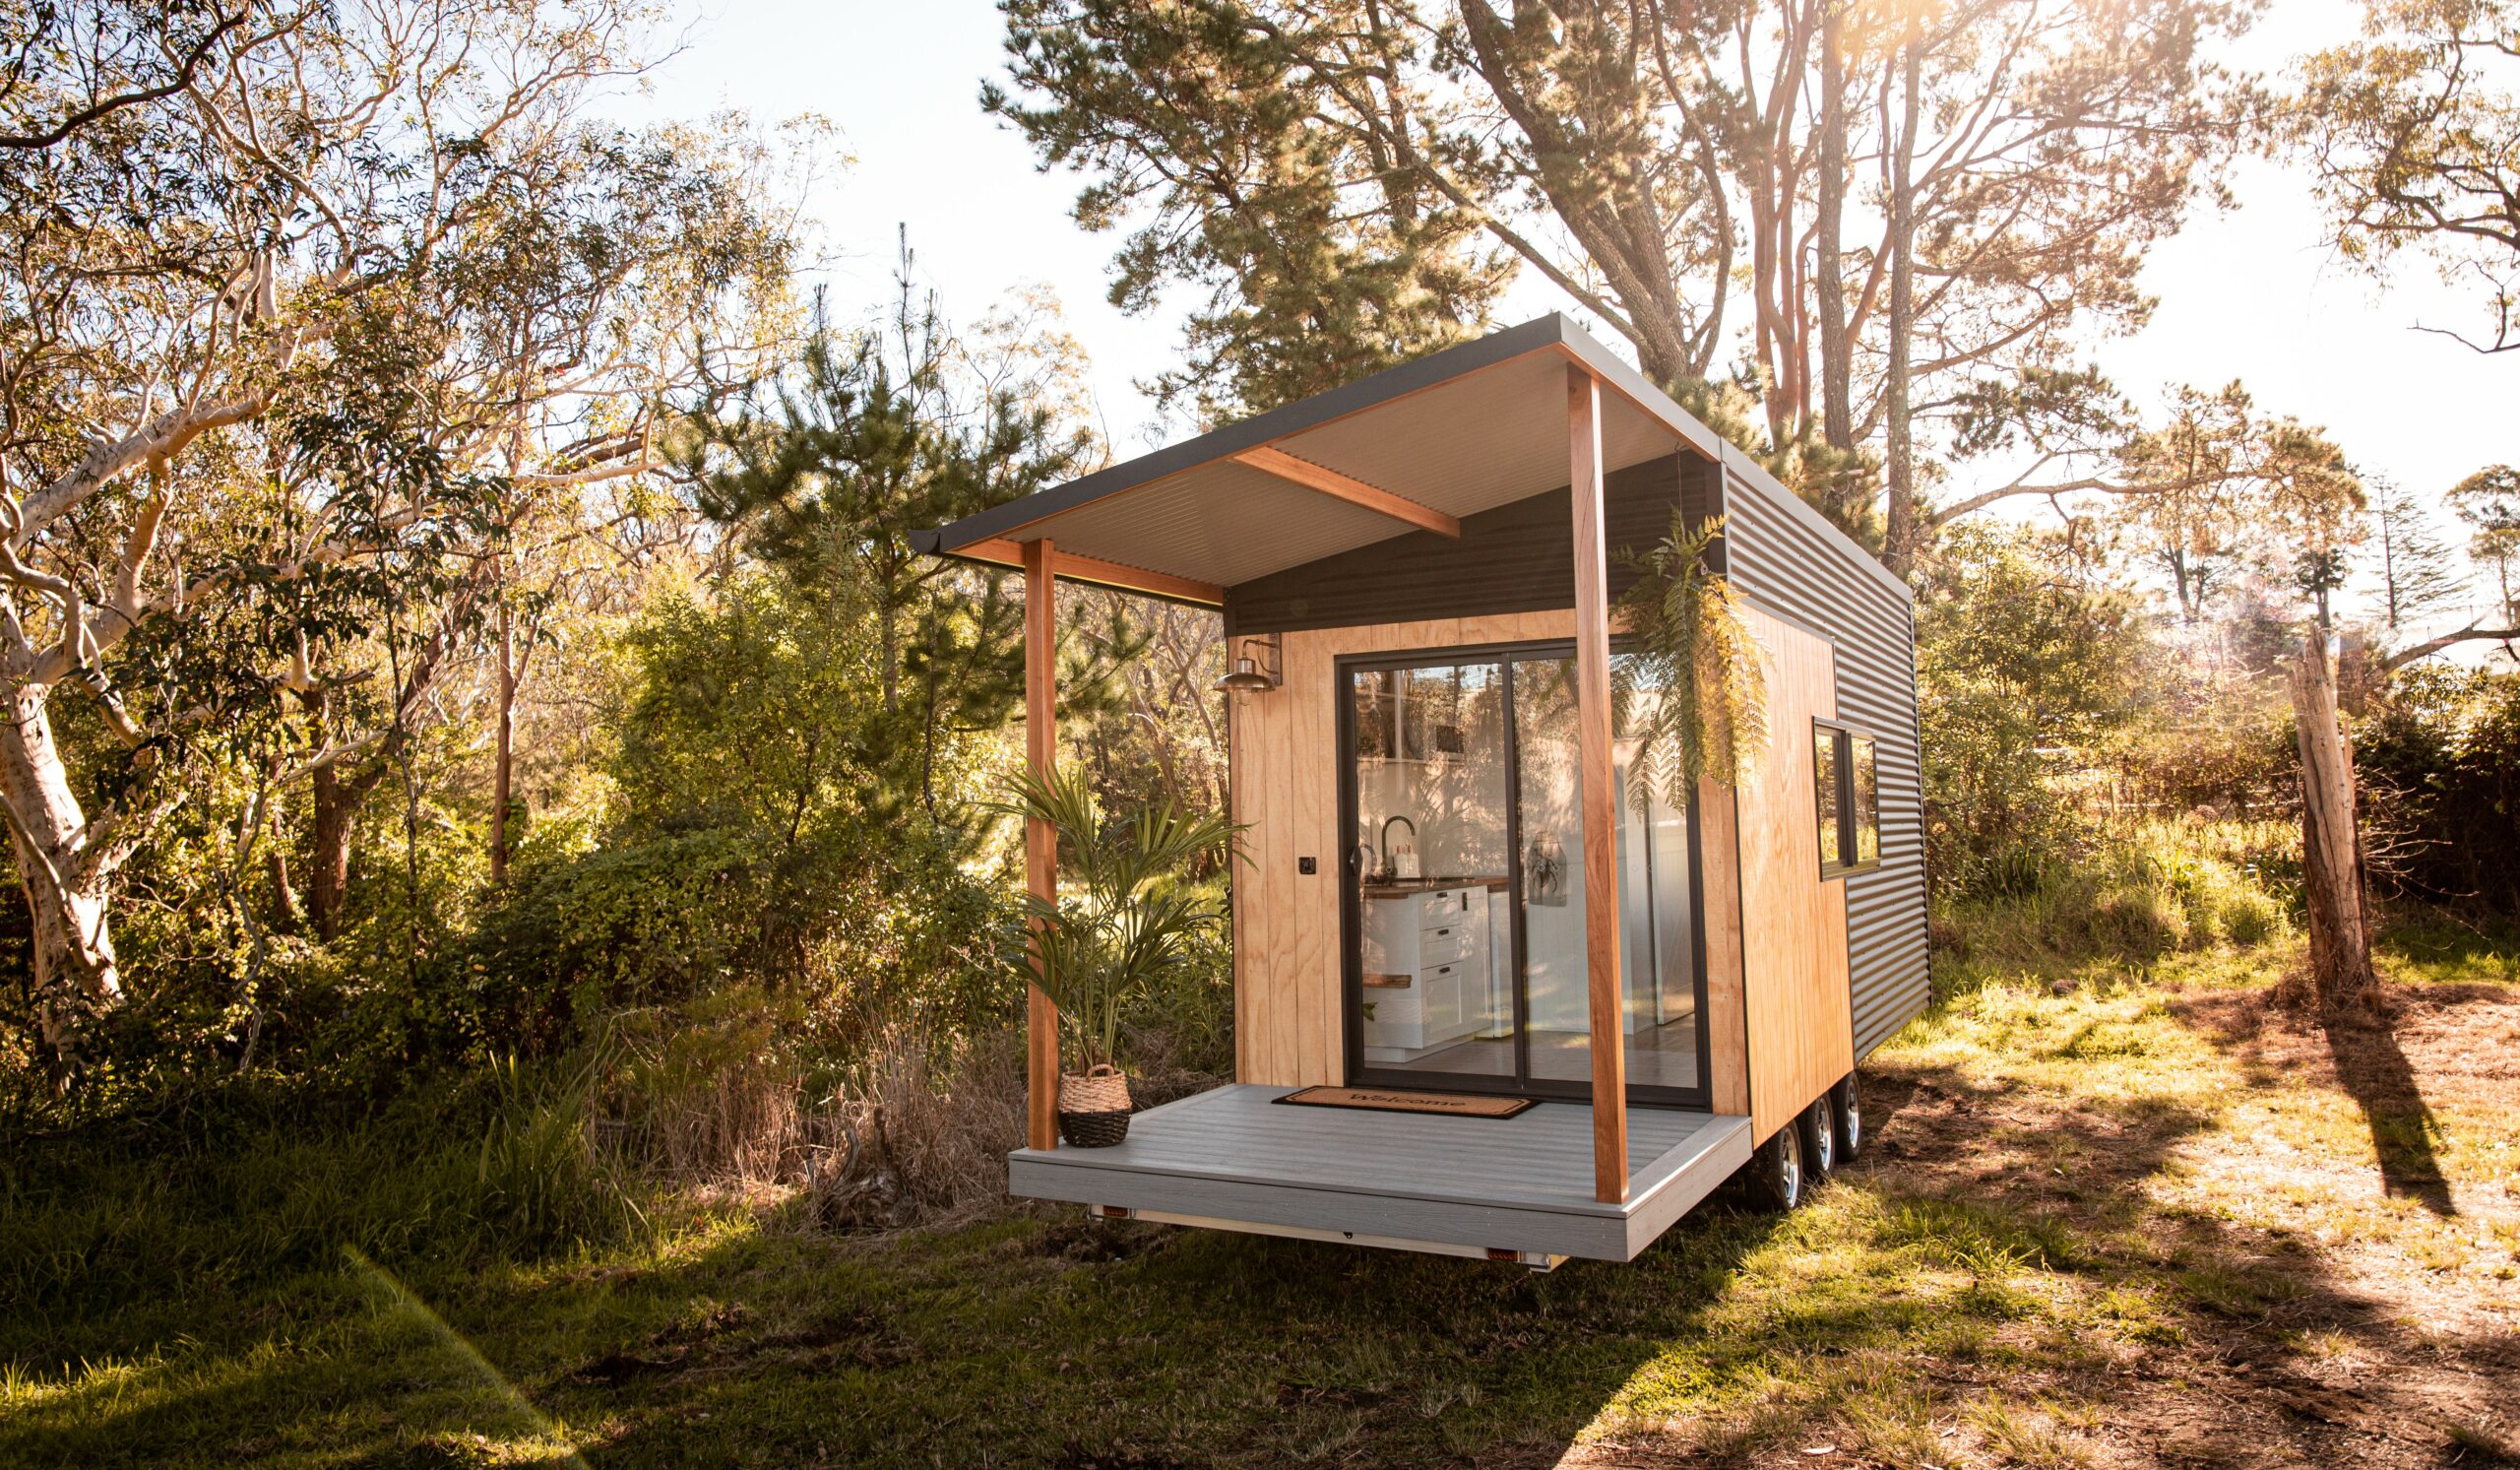 Single level tiny home with deck and awning.